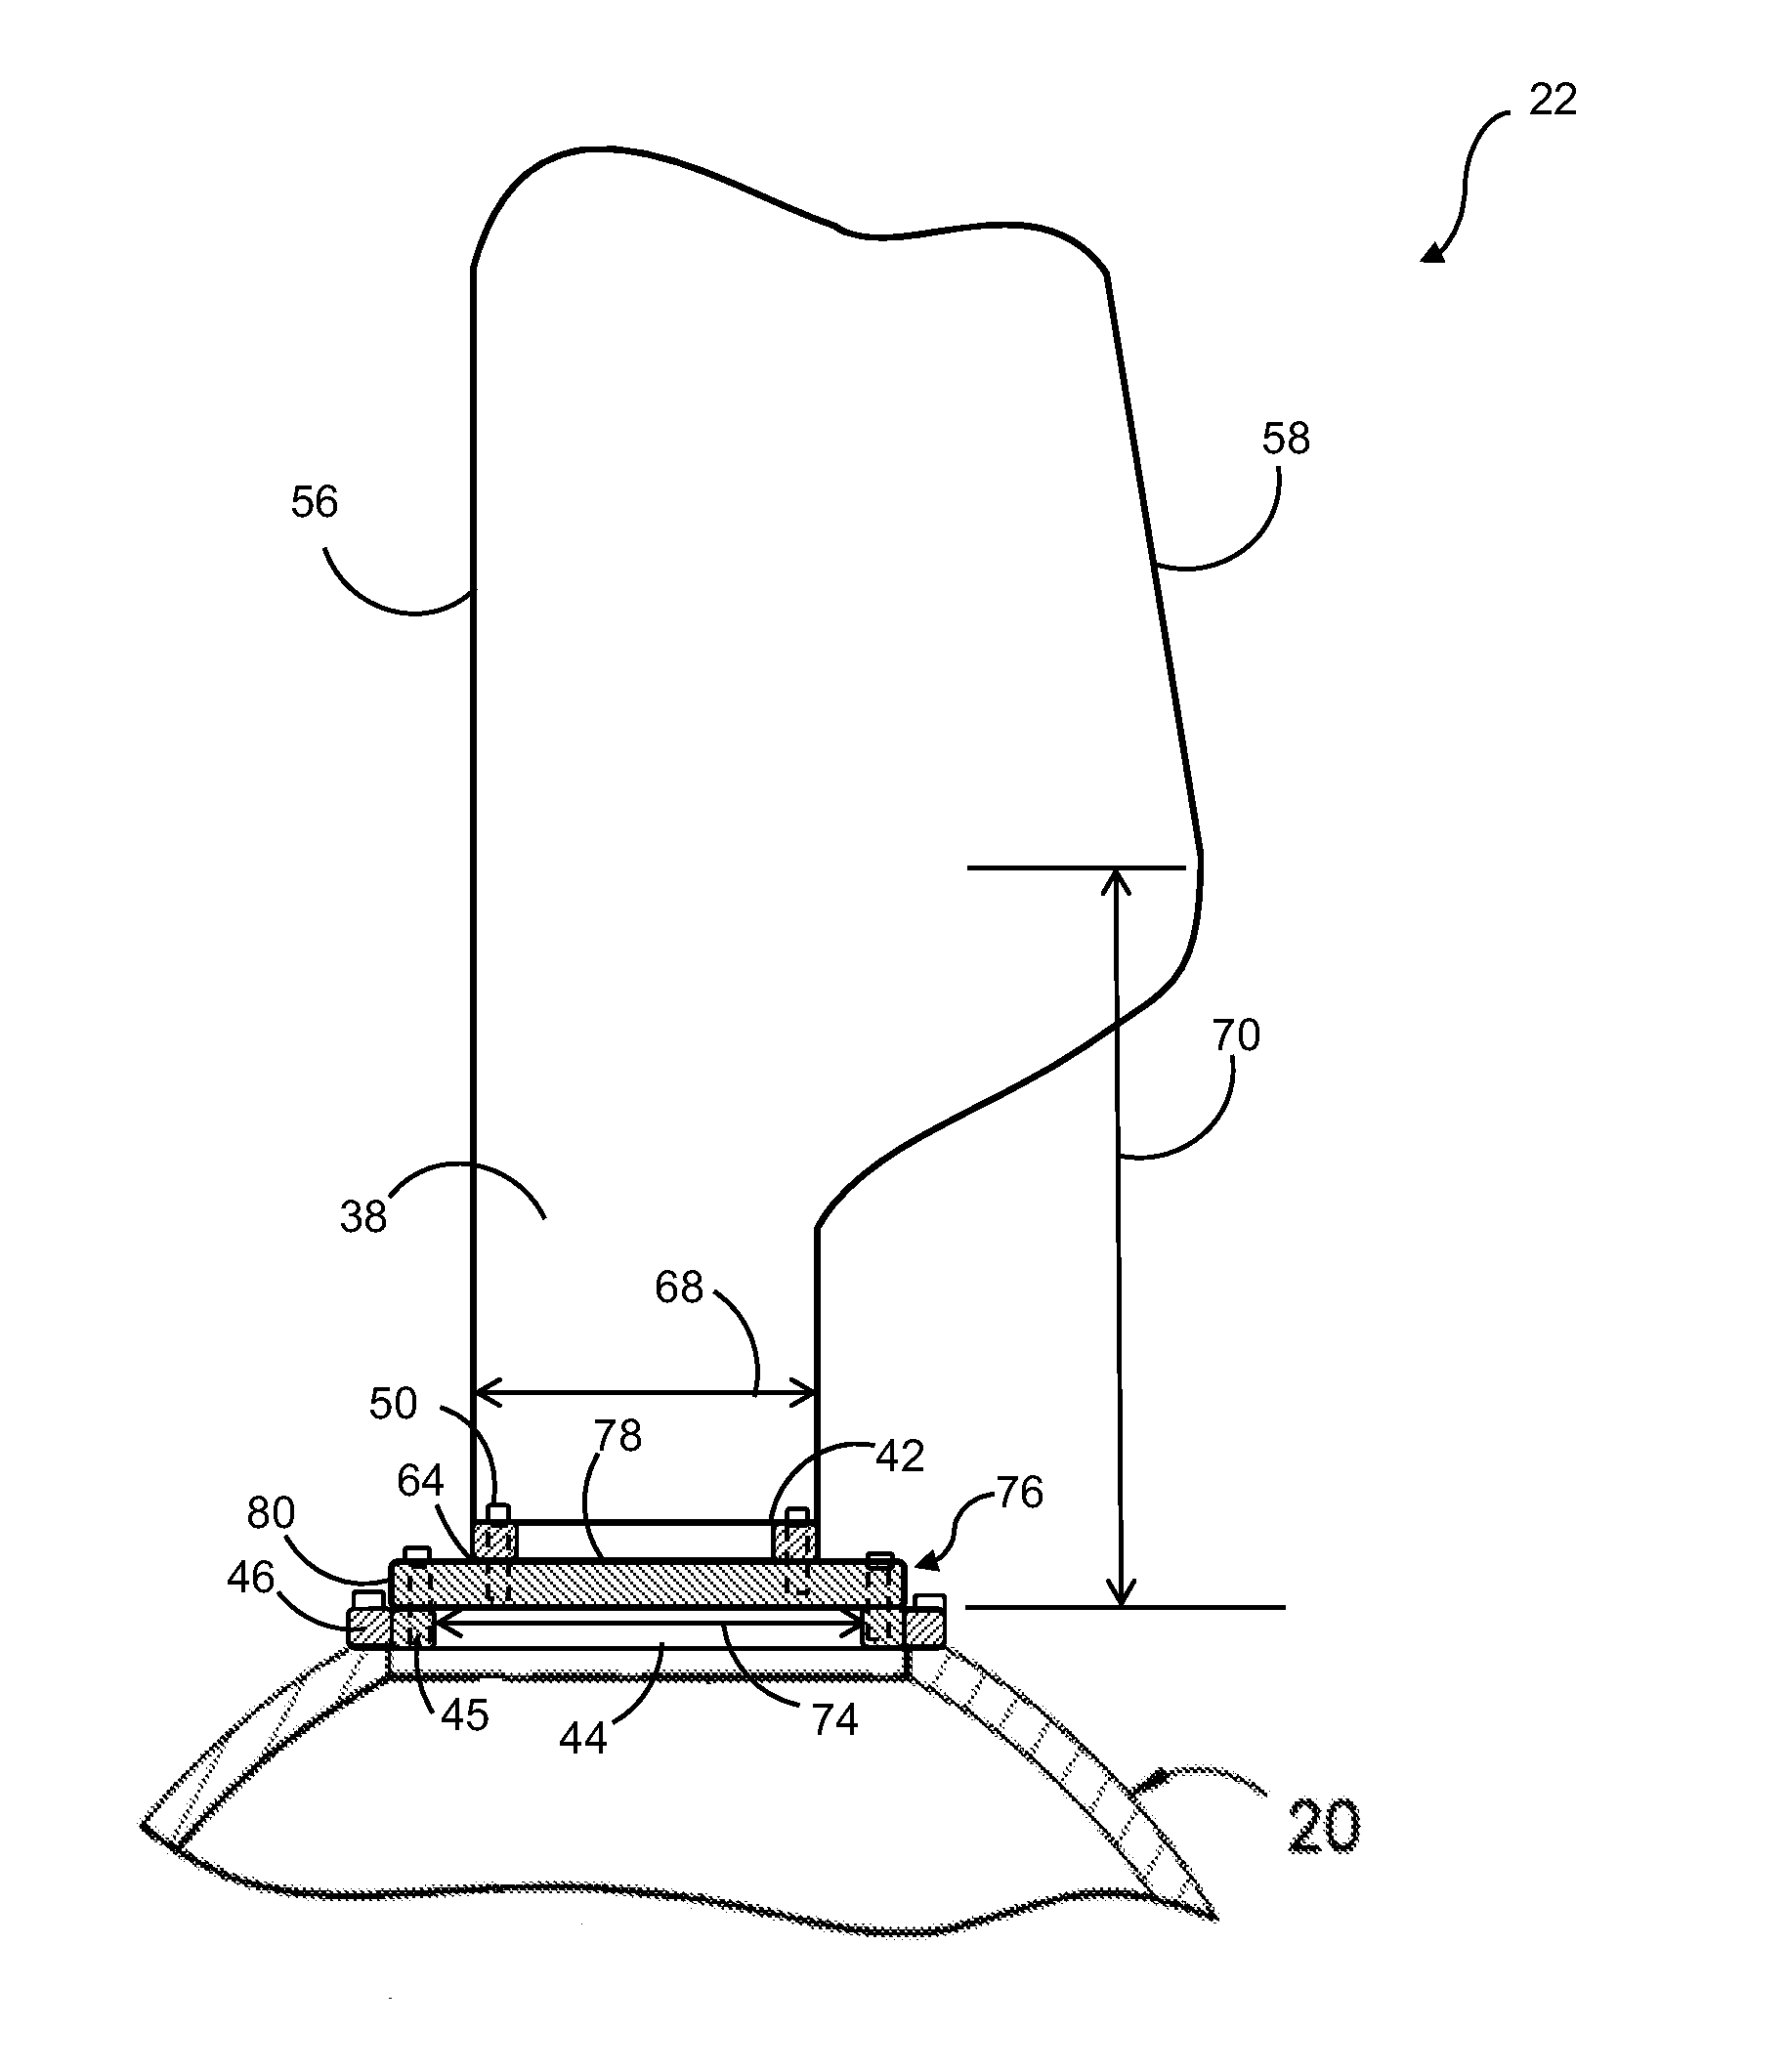 Root end assembly configuration for a wind turbine rotor blade and associated forming methods